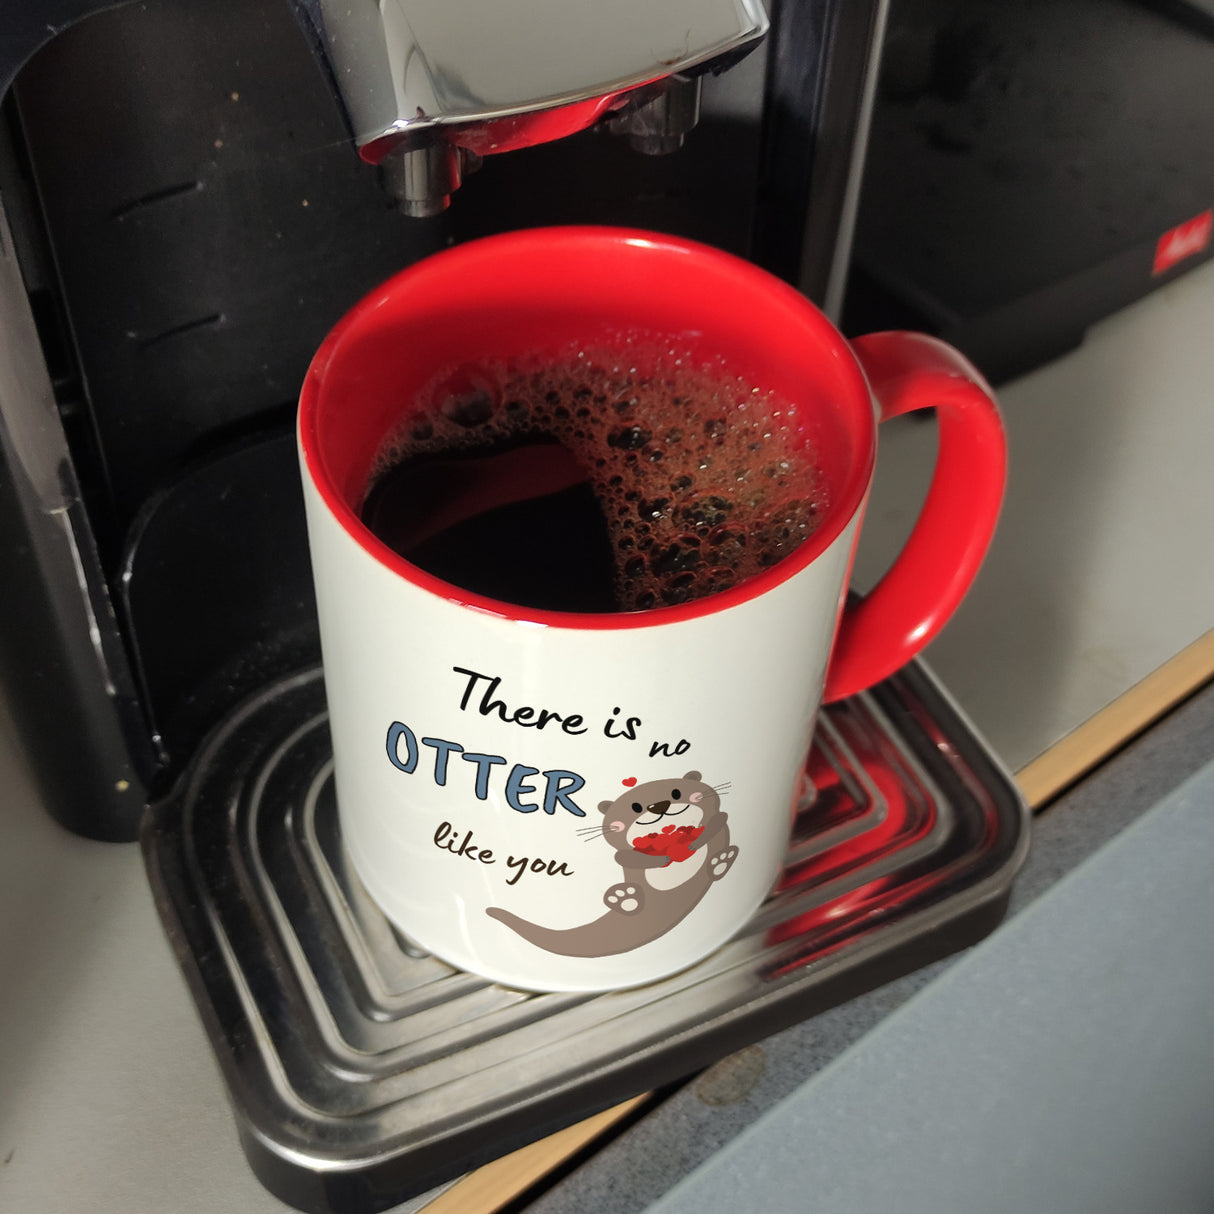 Otter Kaffeebecher mit Spruch: There is no Otter like you